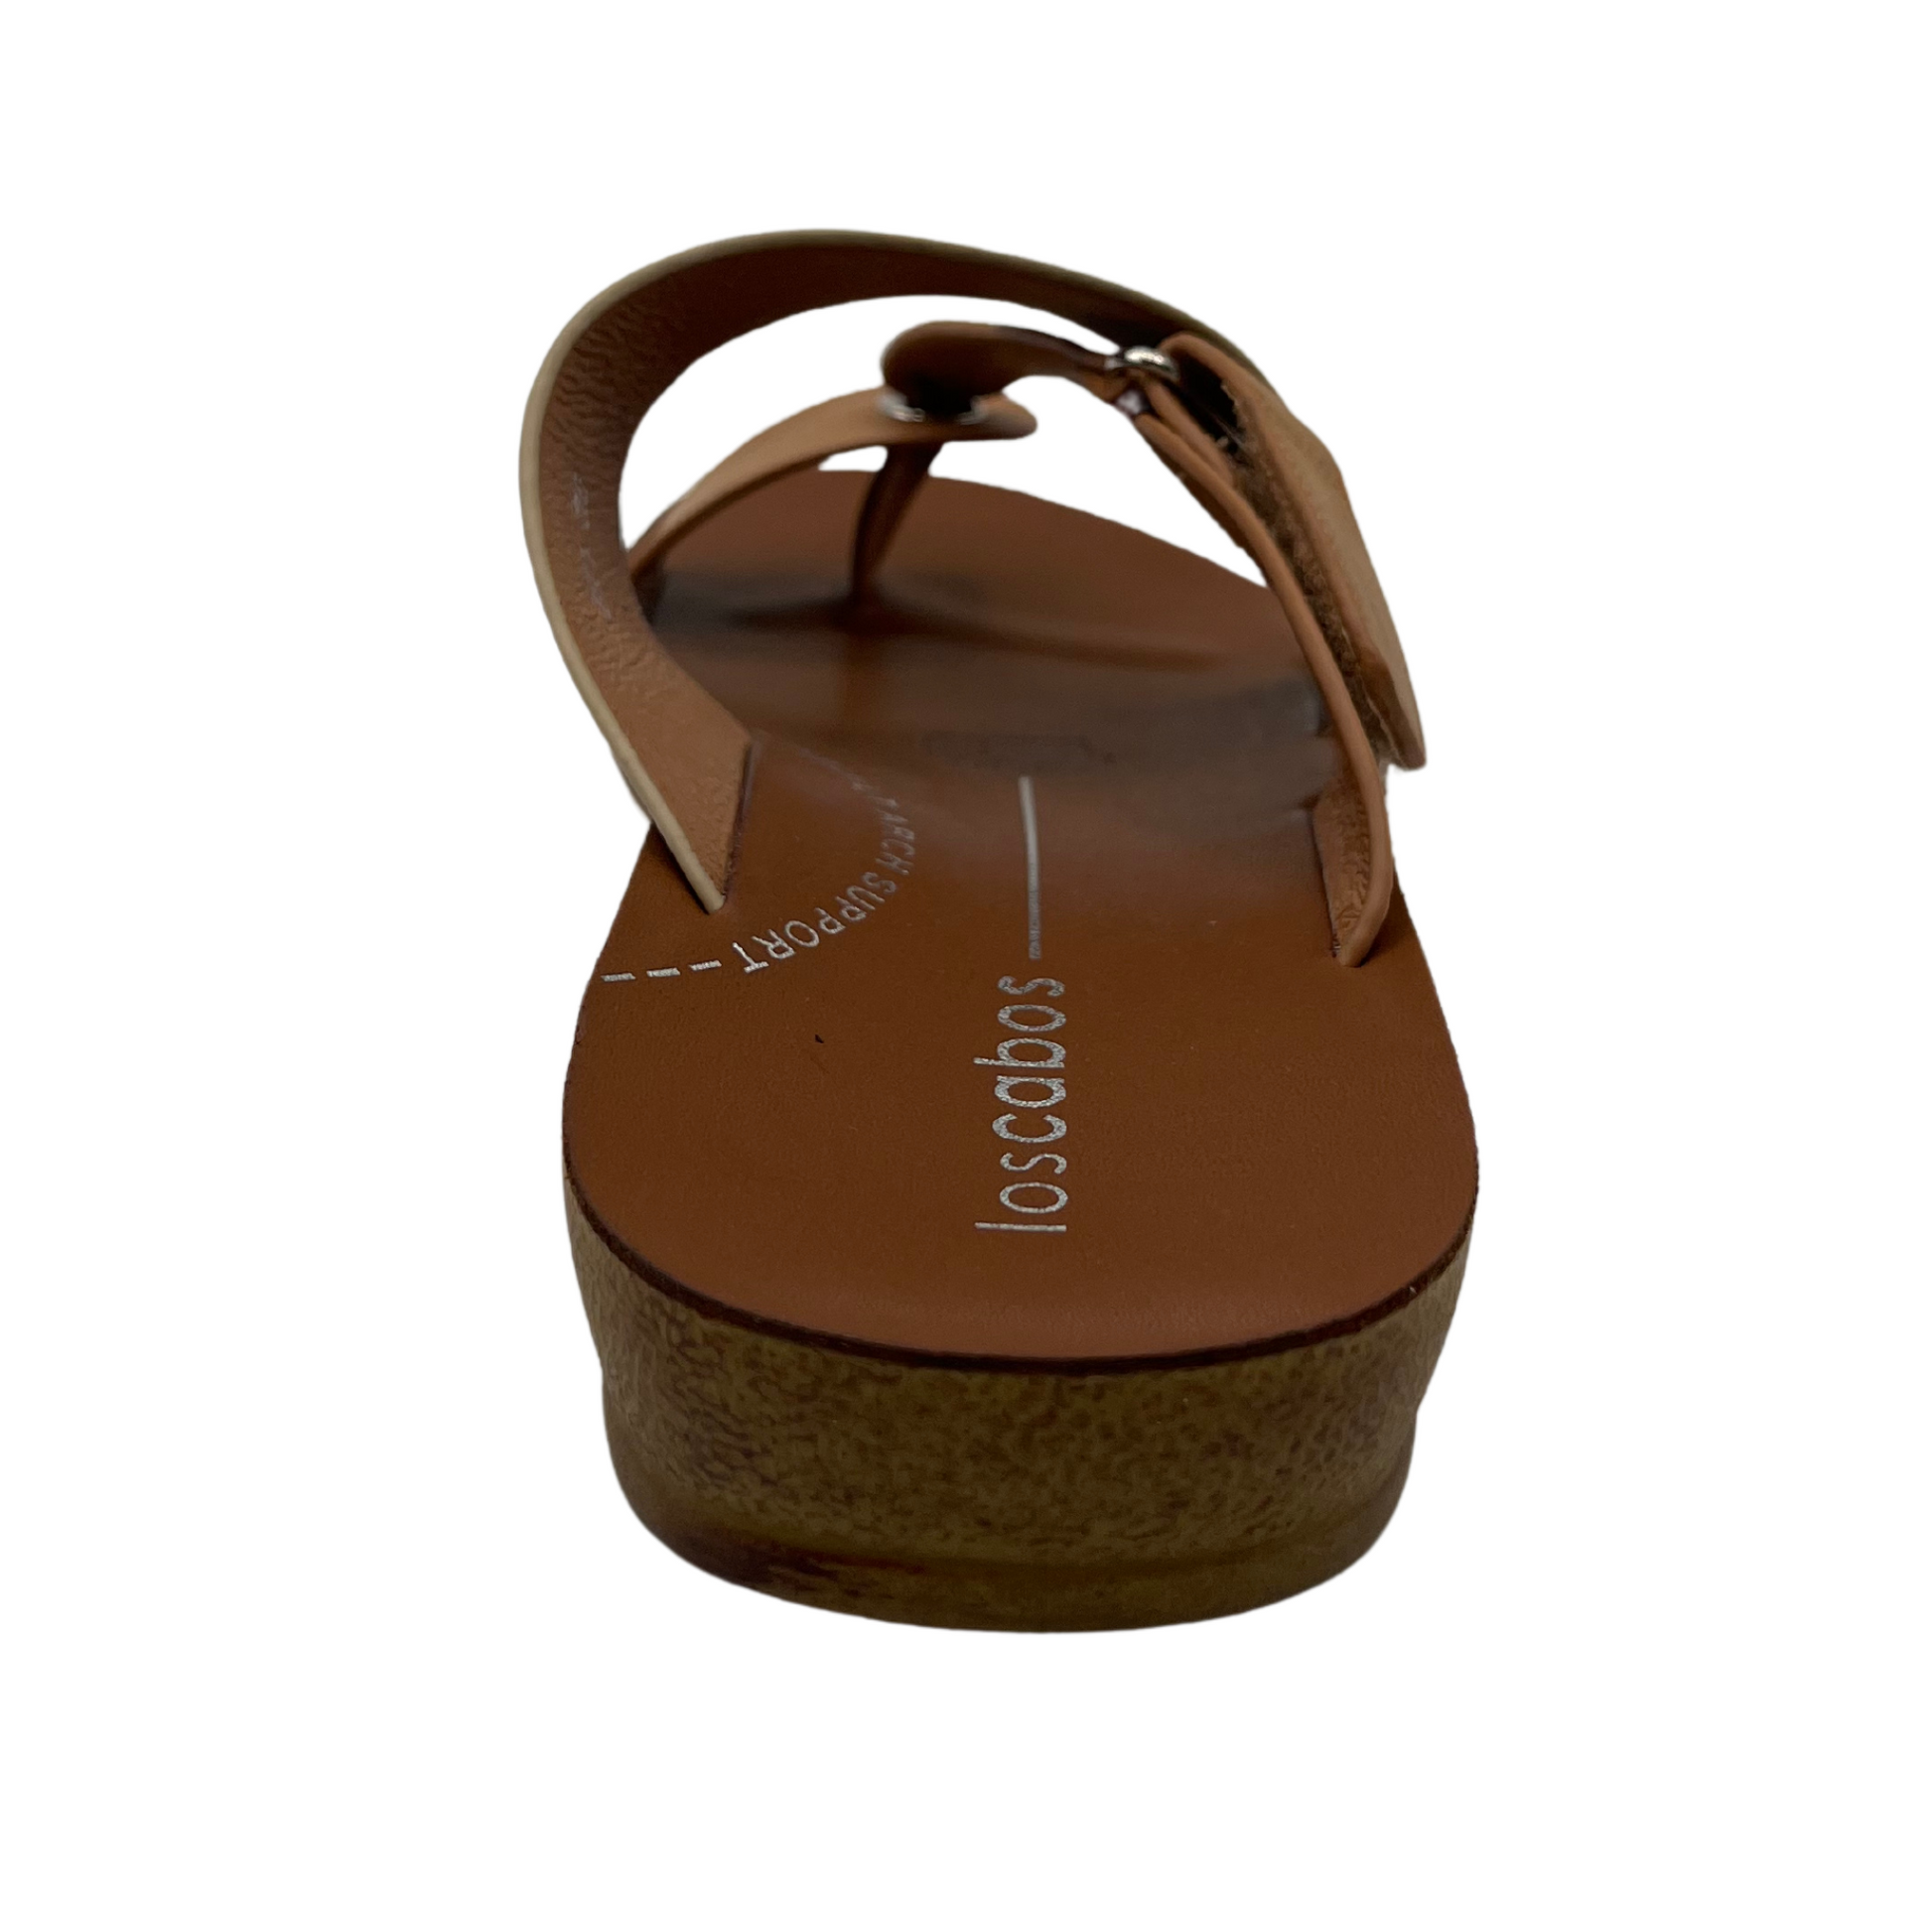 Back view of brown and gold strapped sandal with toe strap and velcro closure